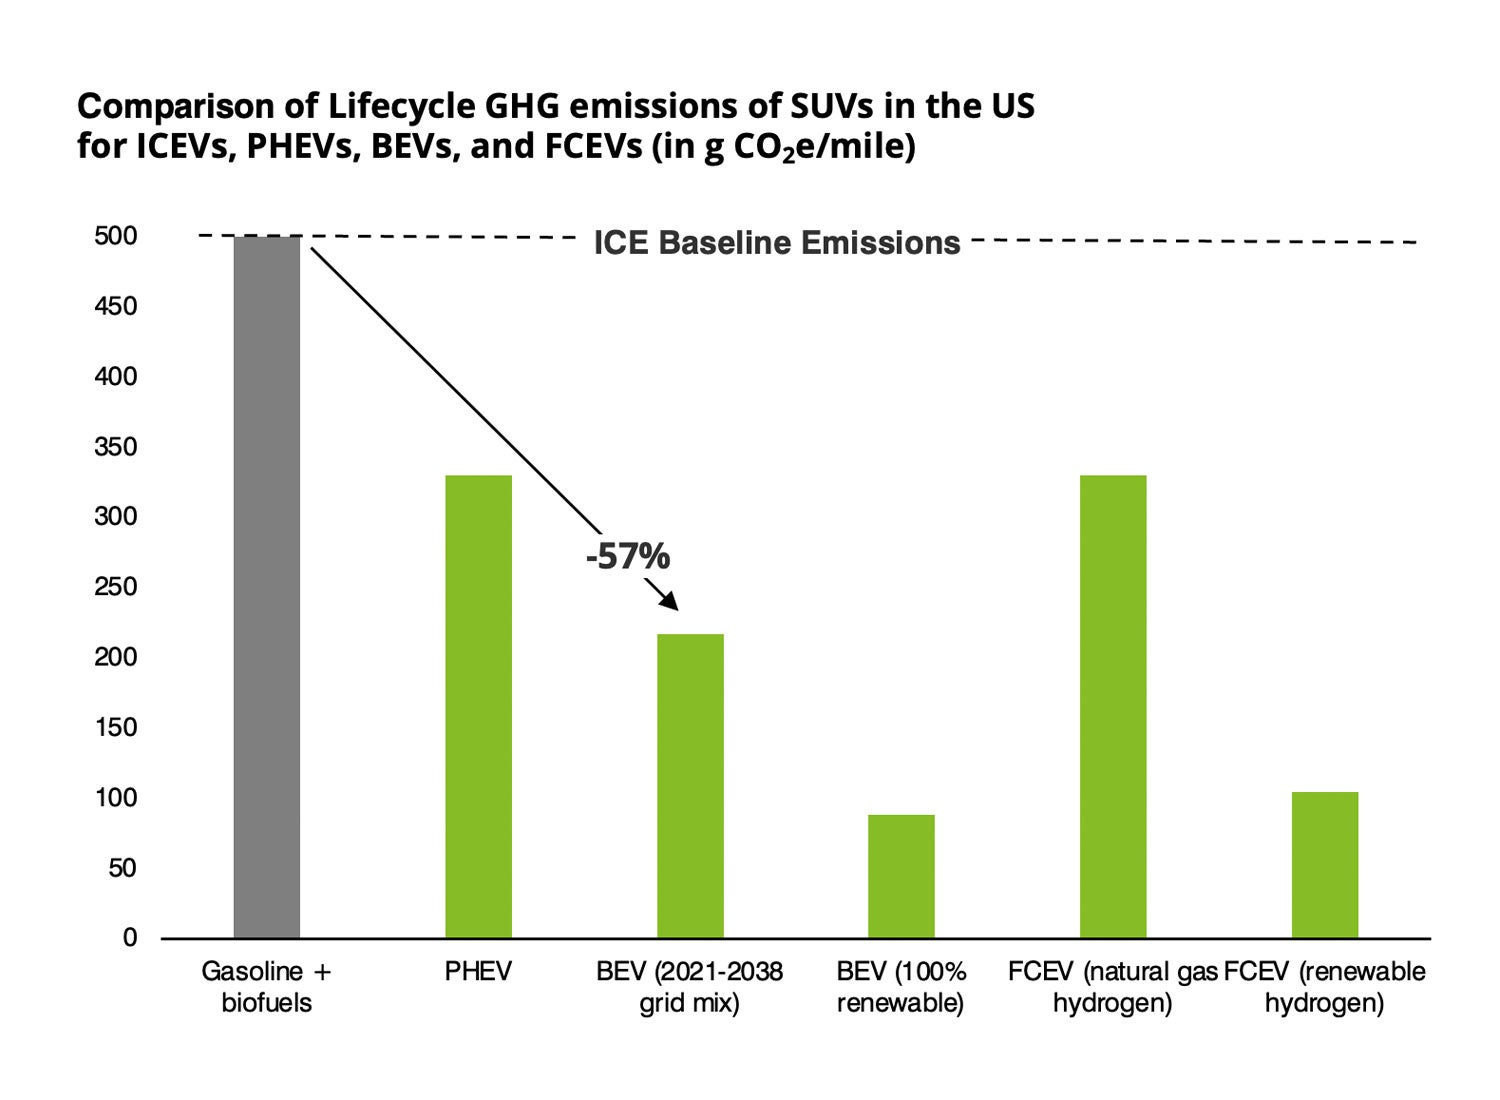 Comparison of Lifecycle GHG emissions of SUVs in the US for ICEVs, PHEVs, BEVs, and FCEVs (in g CO2e/mile)